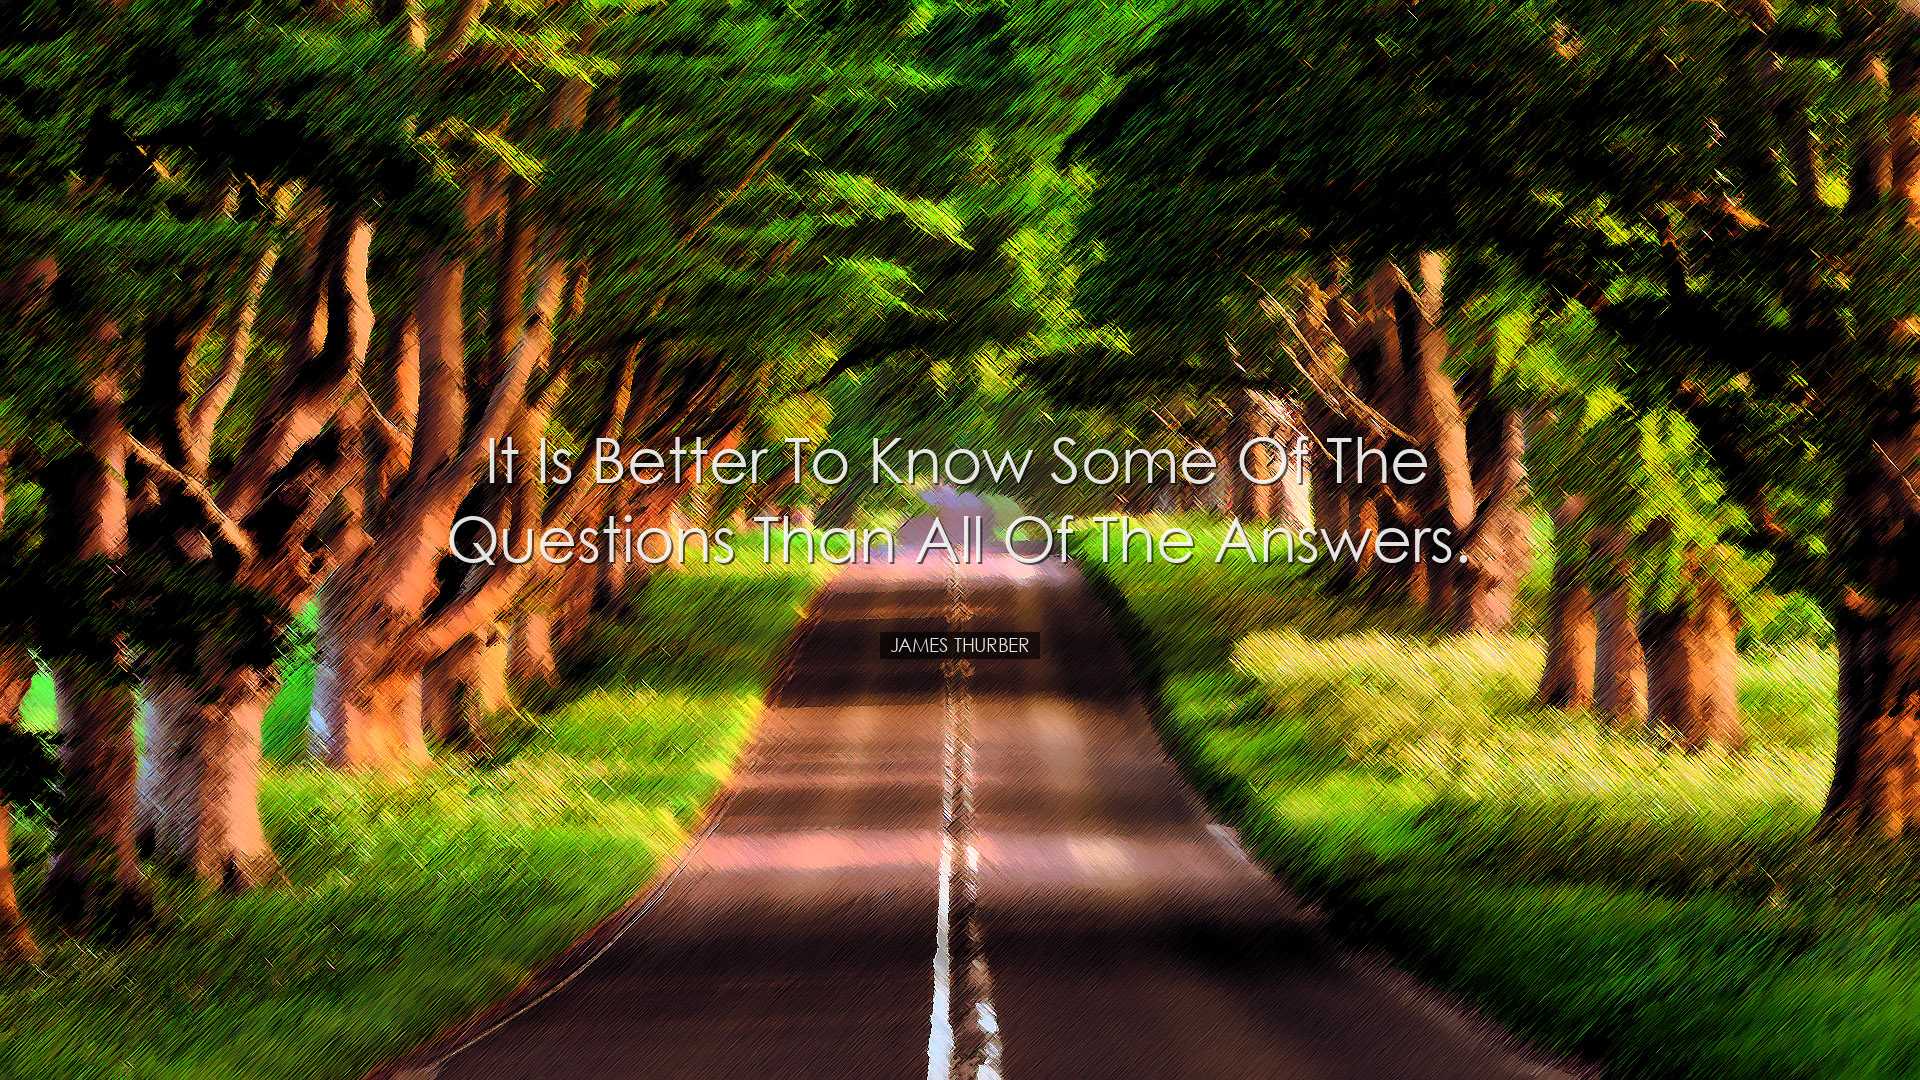 It is better to know some of the questions than all of the answers